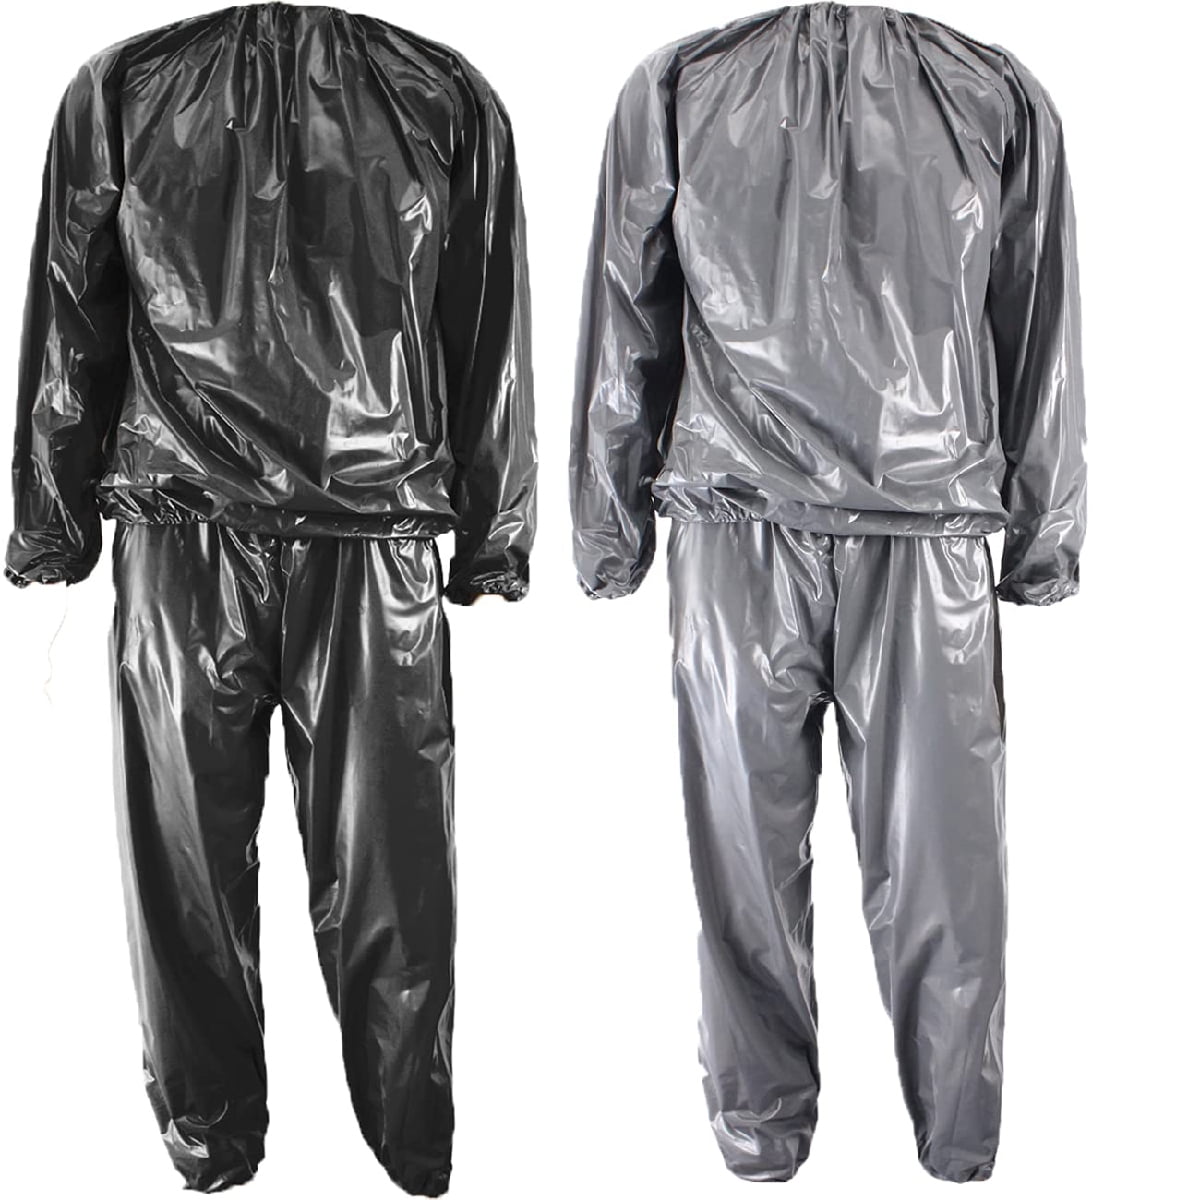 Sauna Sweat Suit heavy duty exercise Gym Training suit fitness weight loss New 